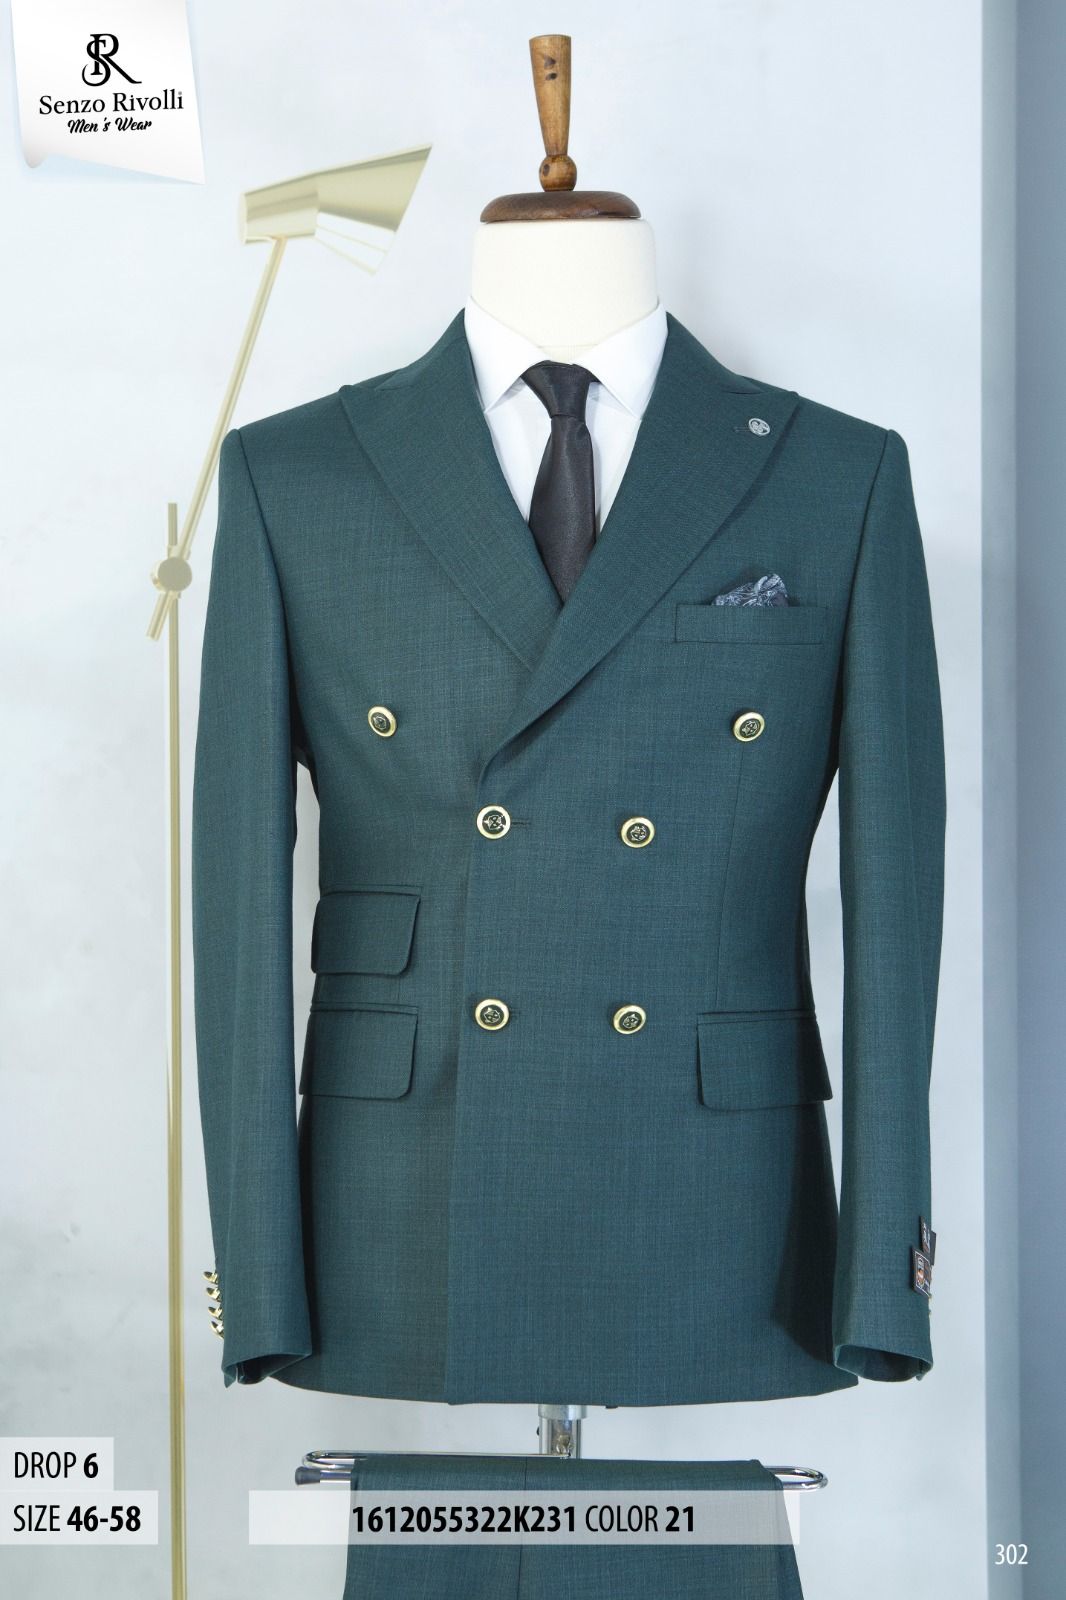 EXECUTIVE DARK GREEN BREASTED TURKEY SUIT WITH GOLDEN BUTTON-deluxe.com.ng